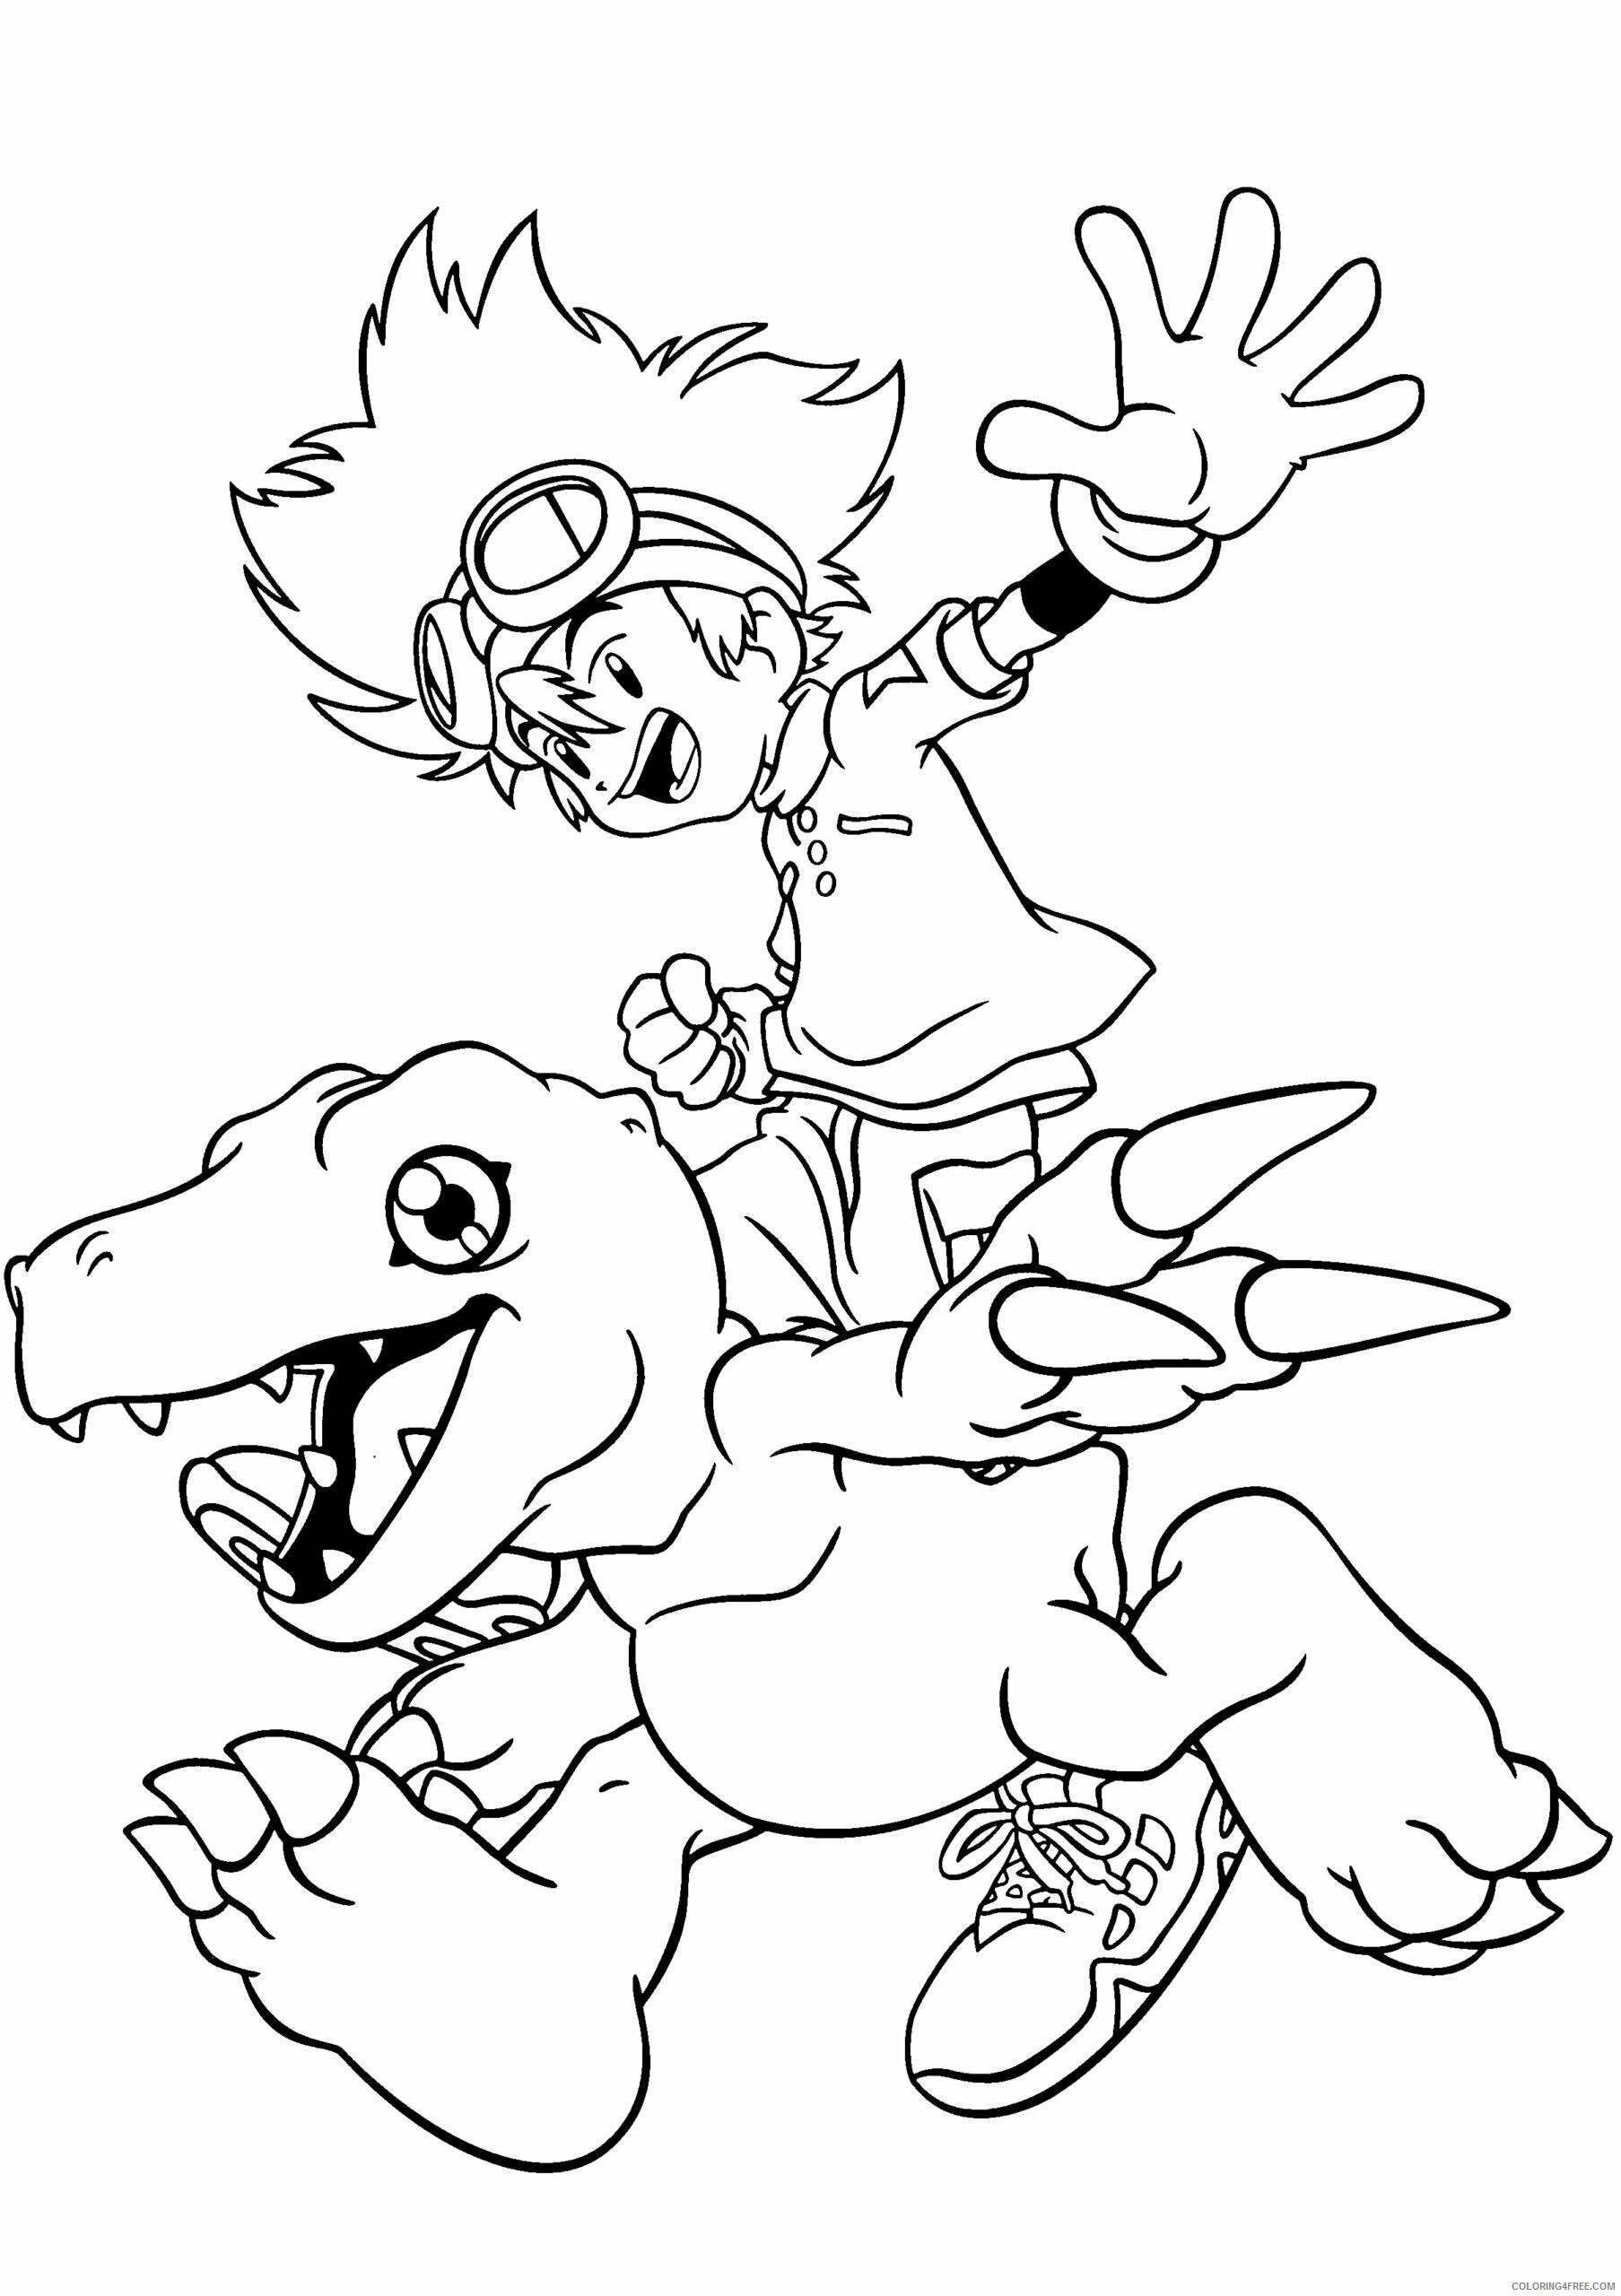 Digimon Printable Coloring Pages Anime Digimon To Print 2021 0398 Coloring4free